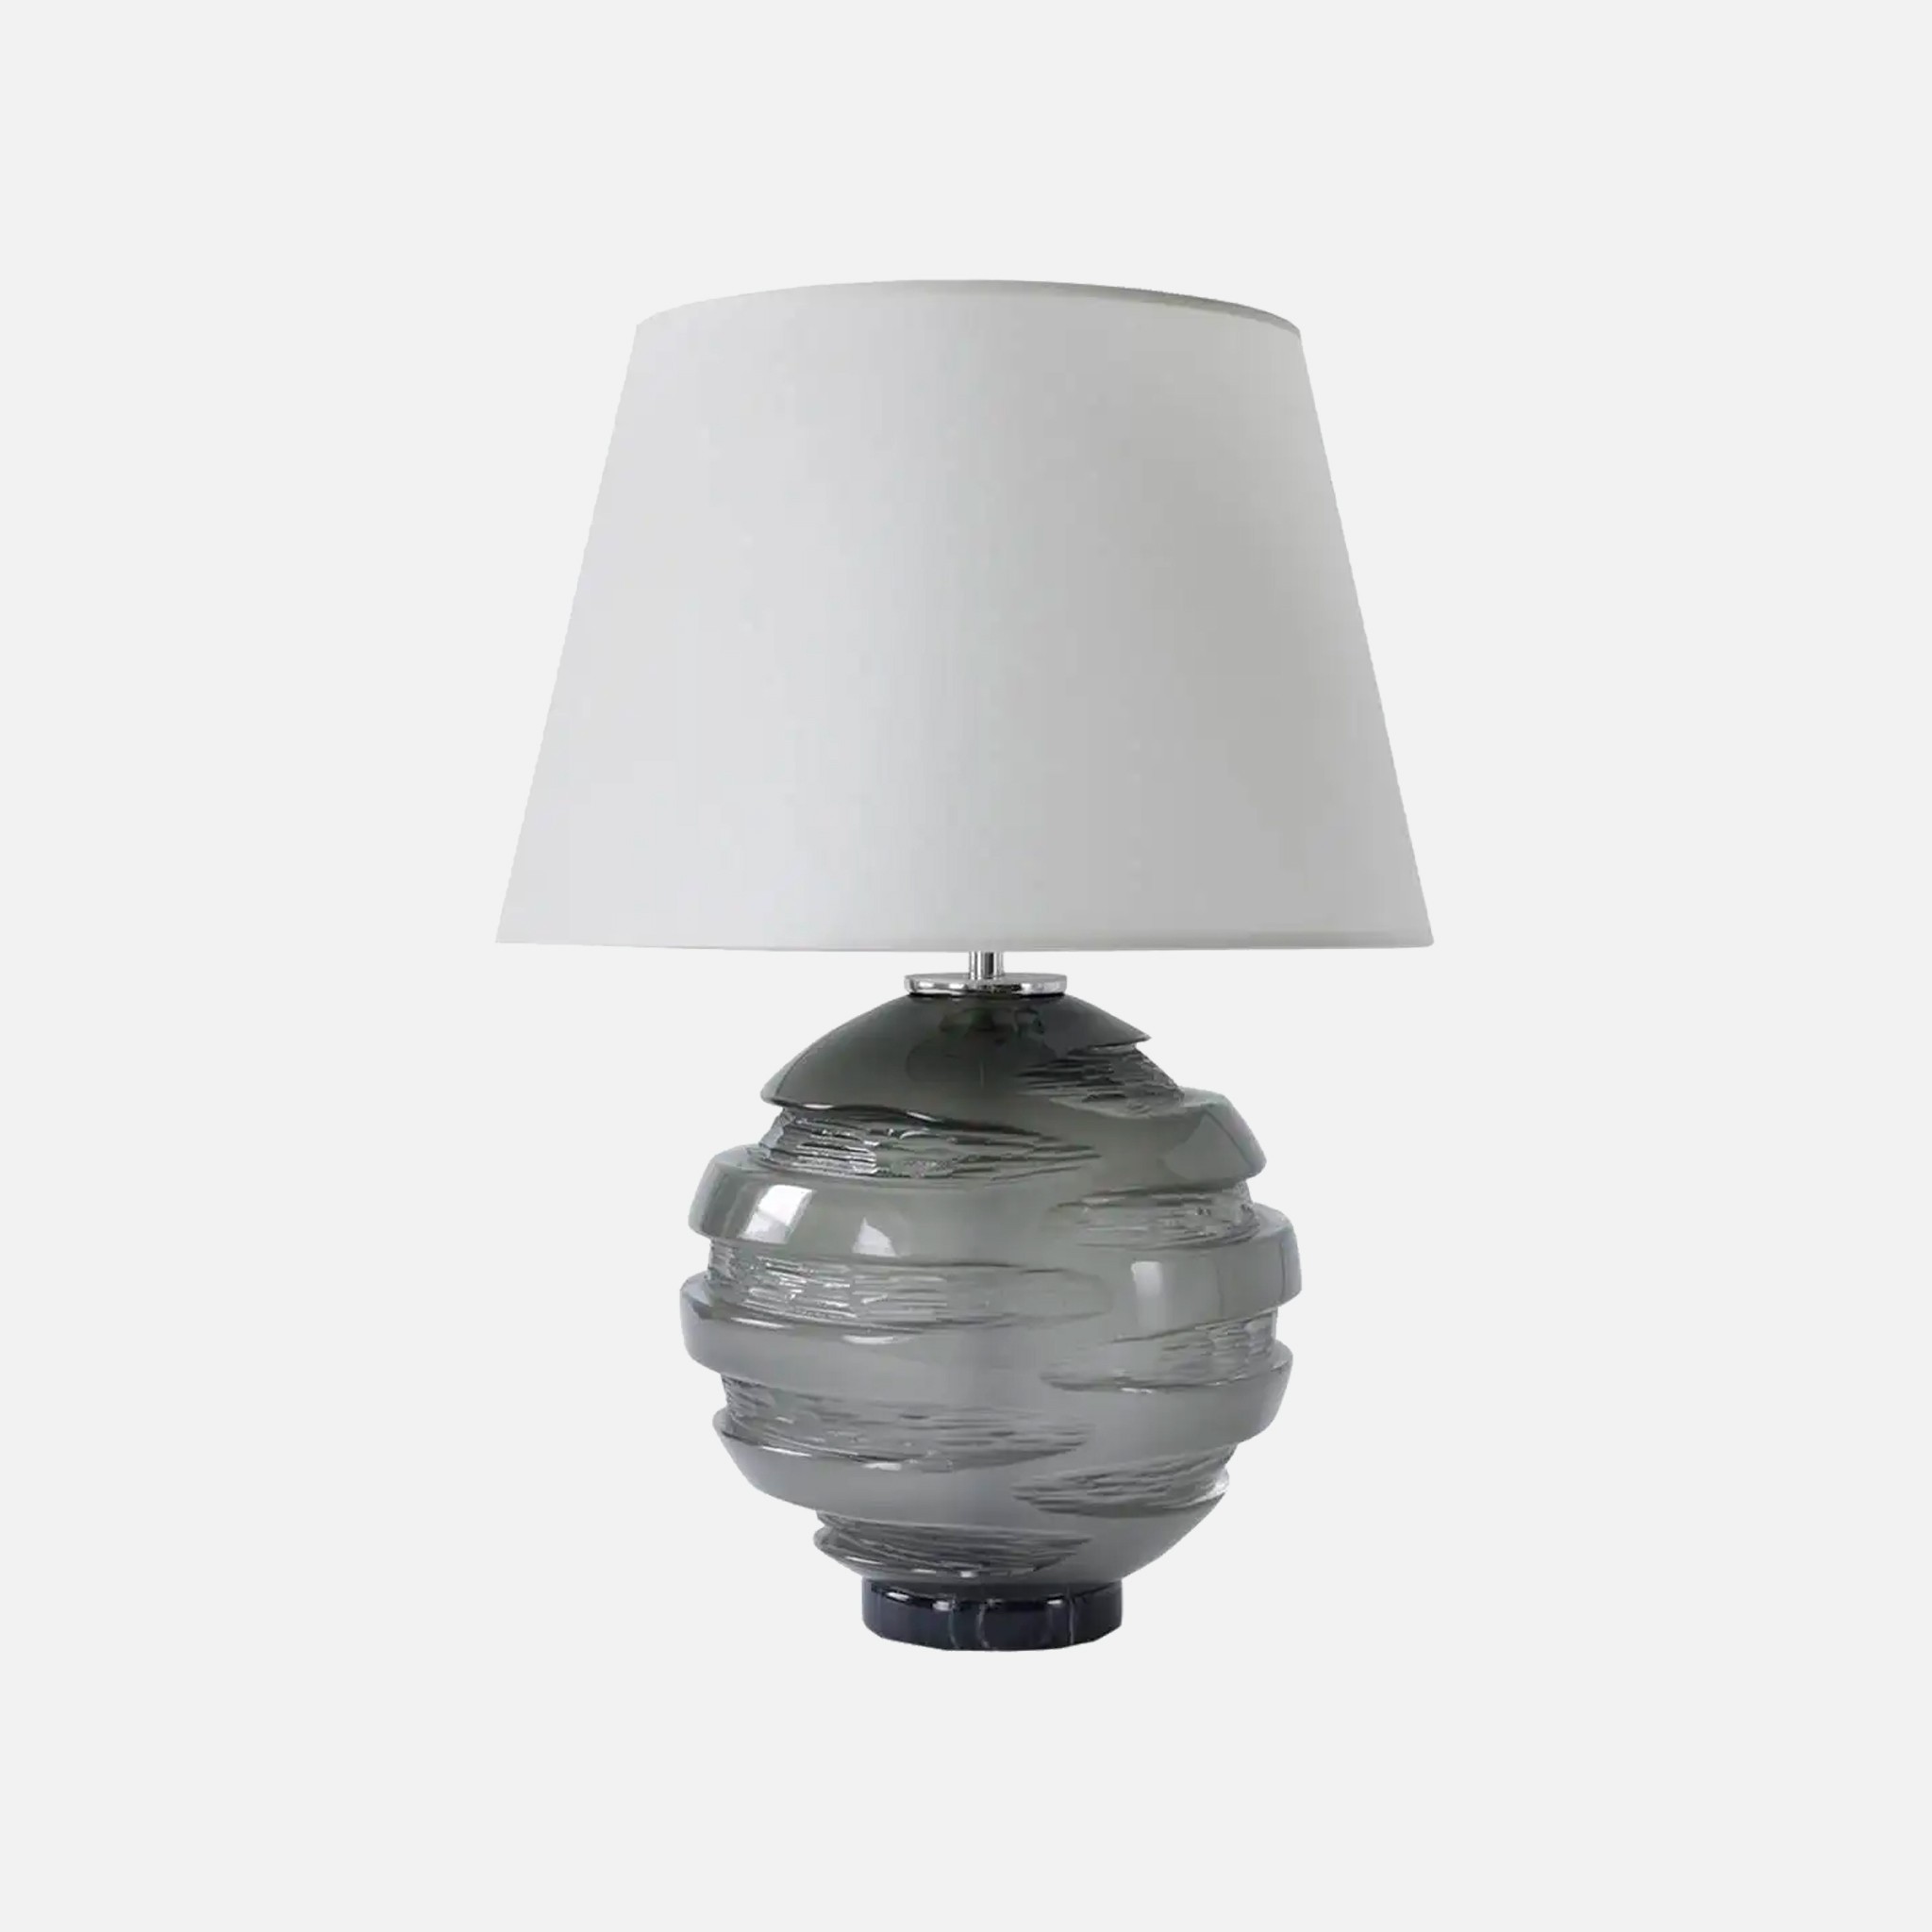 a gray lamp with a white shade on it